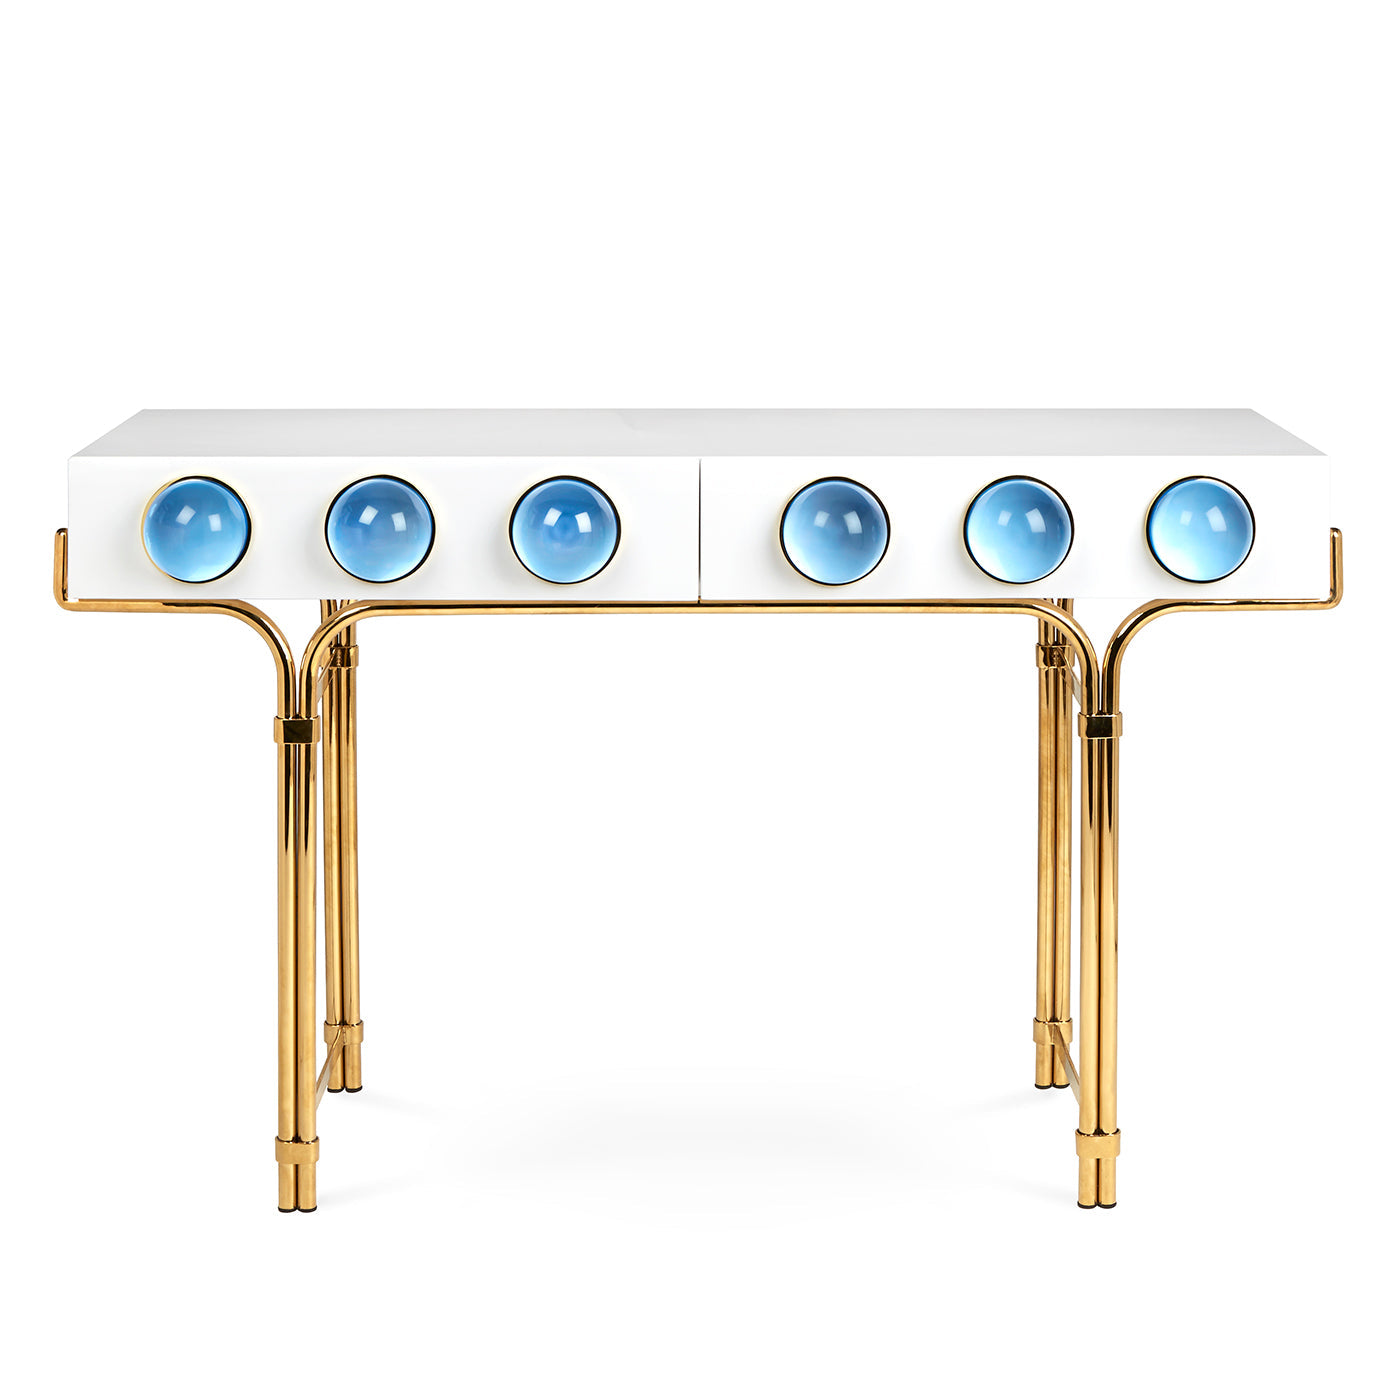 Load image into Gallery viewer, Globo Console Console Jonathan Adler     Four Hands, Mid Century Modern Furniture, Old Bones Furniture Company, Old Bones Co, Modern Mid Century, Designer Furniture, https://www.oldbonesco.com/
